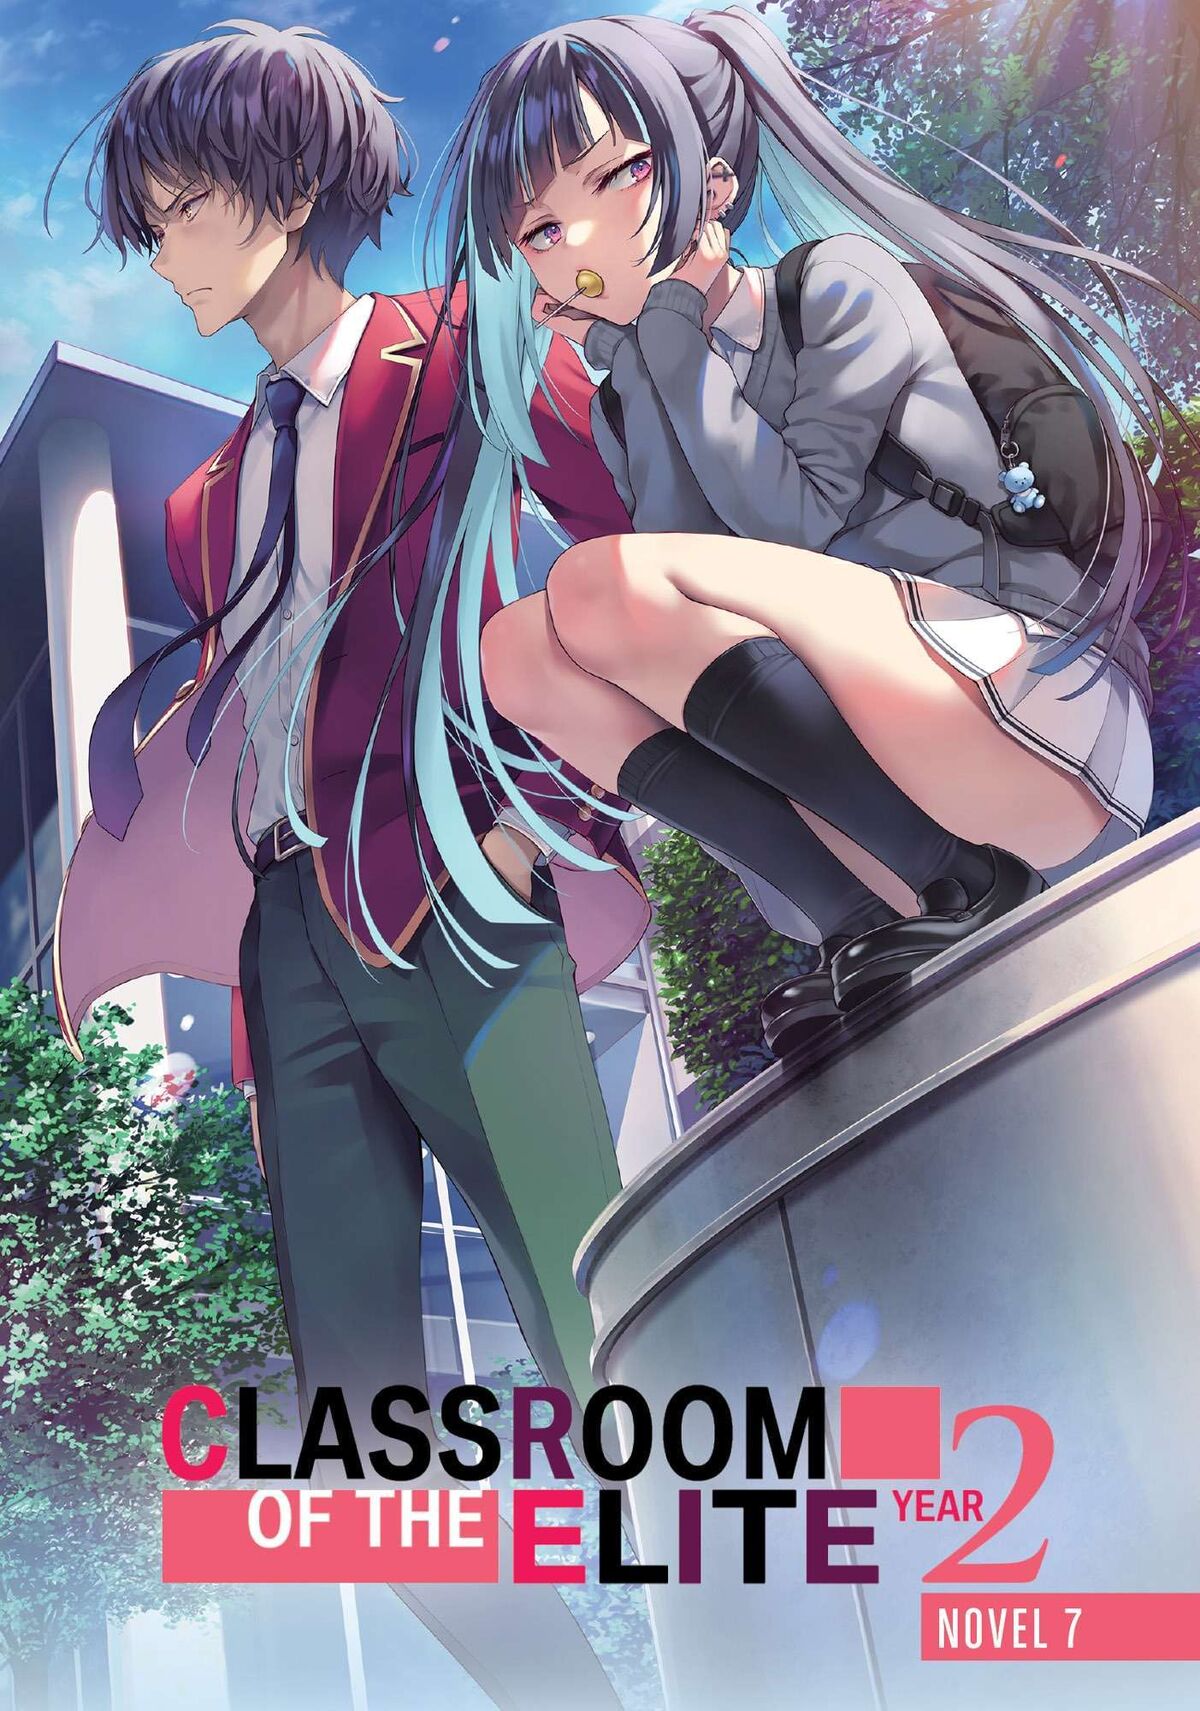 Classroom of the Elite Second Year Volume 1-7. 4.5 You-Zitsu Light Novel  From JP